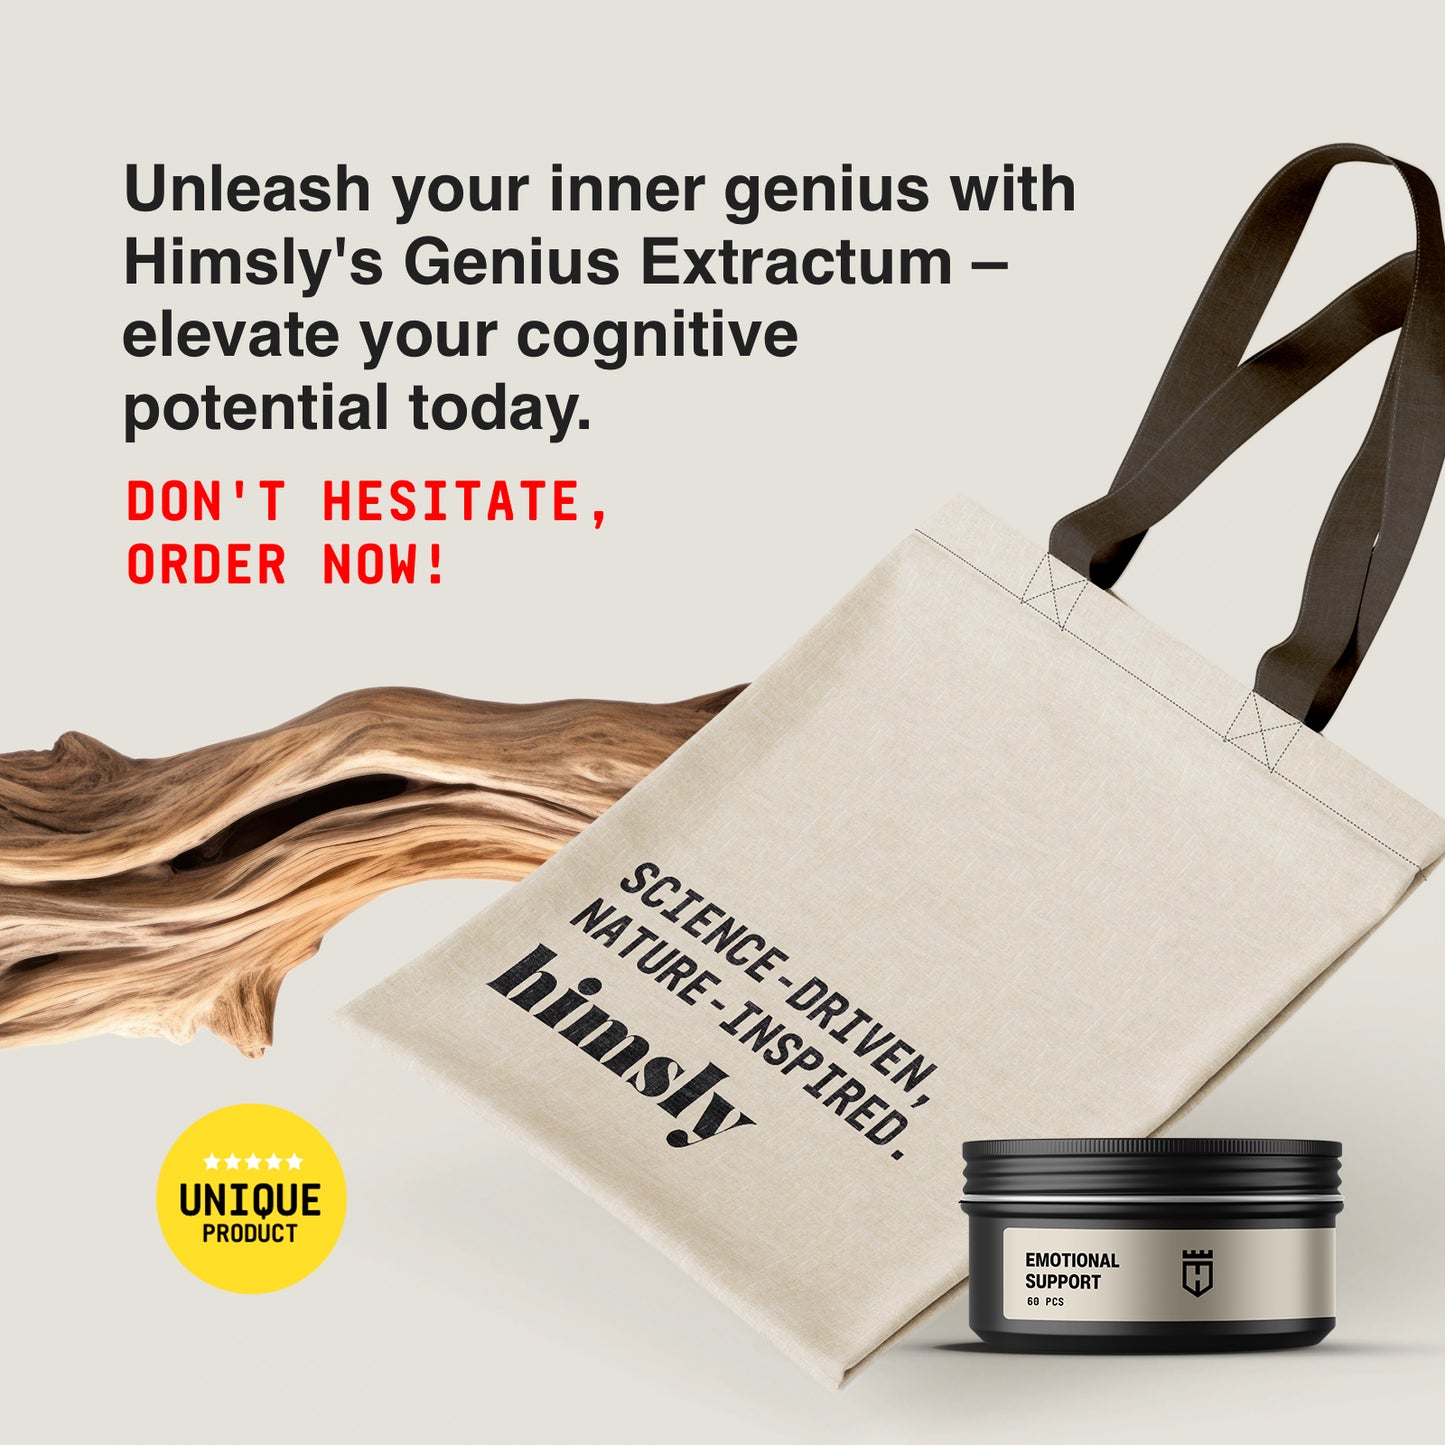 Unleash your inner genius with Himsly's Genius Extractum – elevate your cognitive potential today.